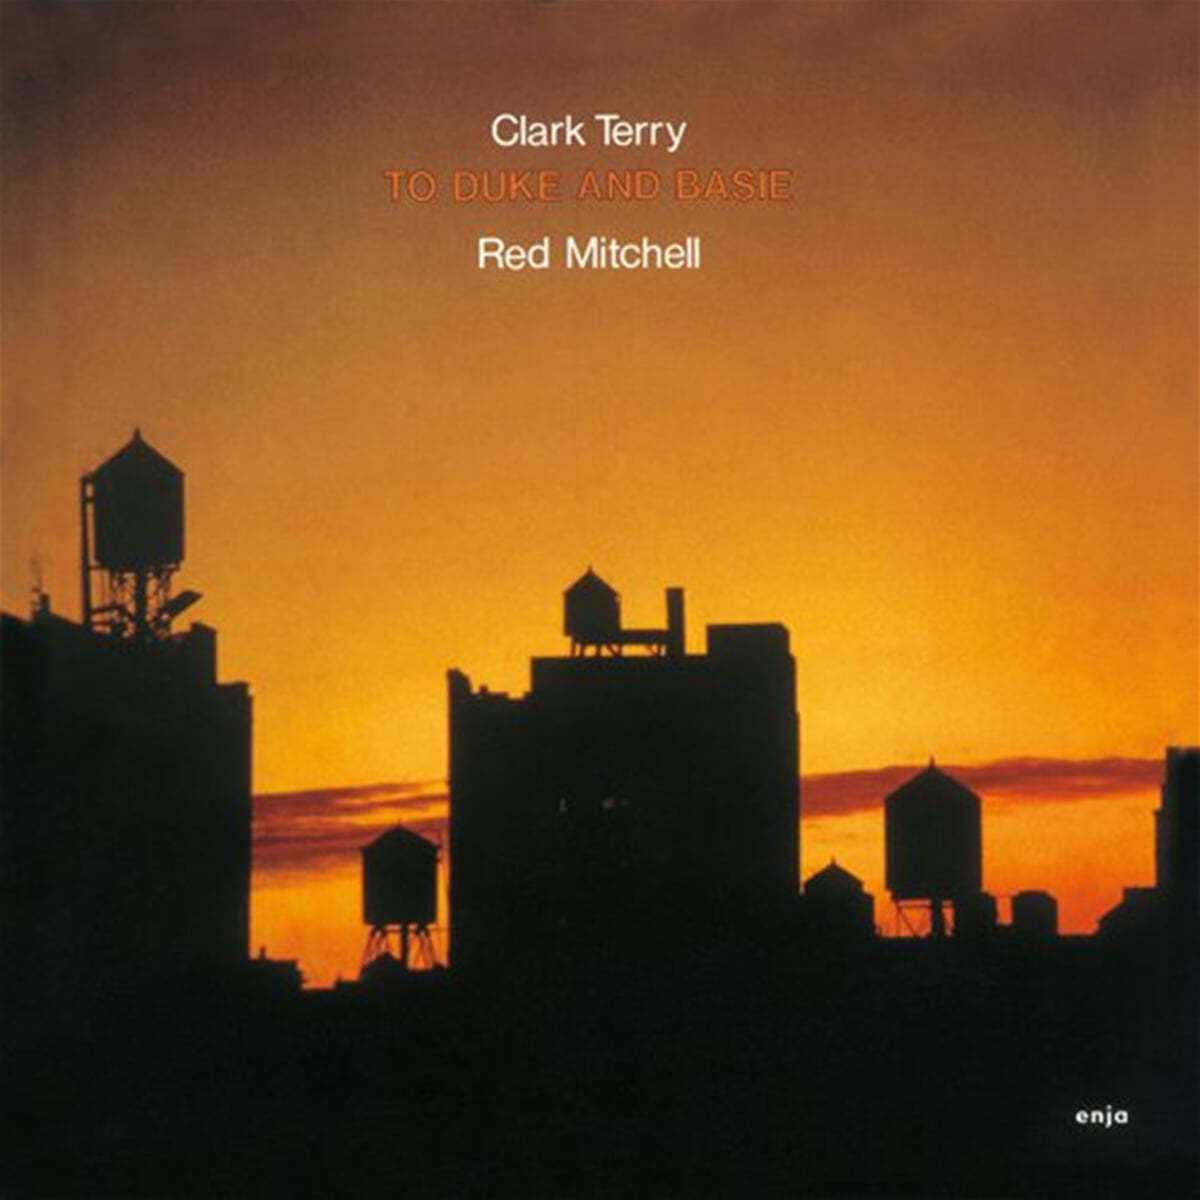 Clark Terry / Red Mitchell (클락 테리 / 레드 미첼) - To Duke And Basie 